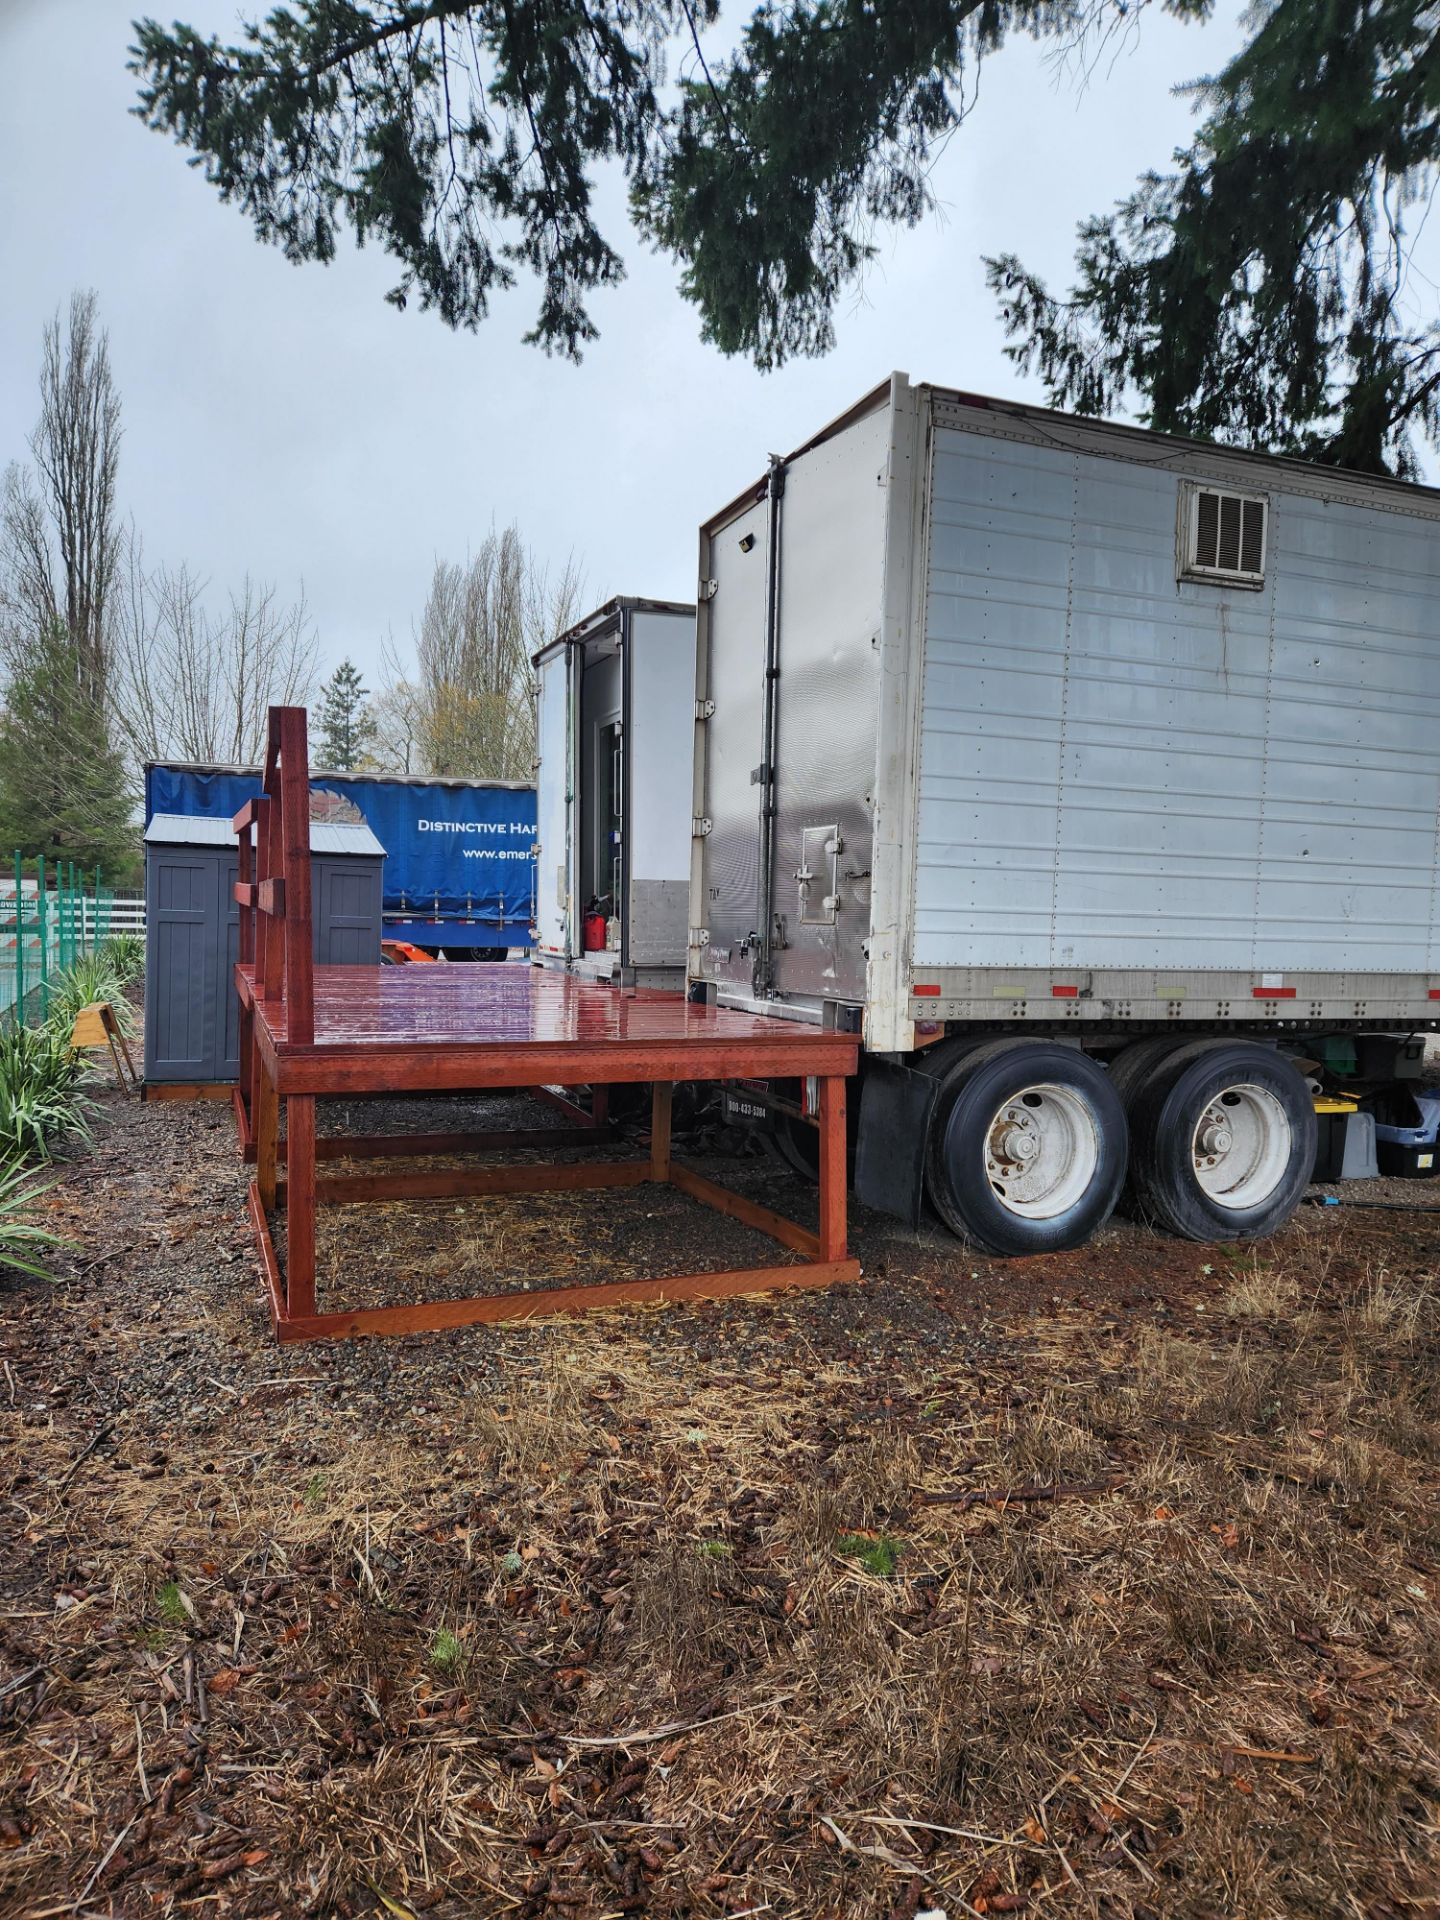 (Located in Portland, OR) Turnkey Mushroom Farm in Trailers (All Items Photoed Included)